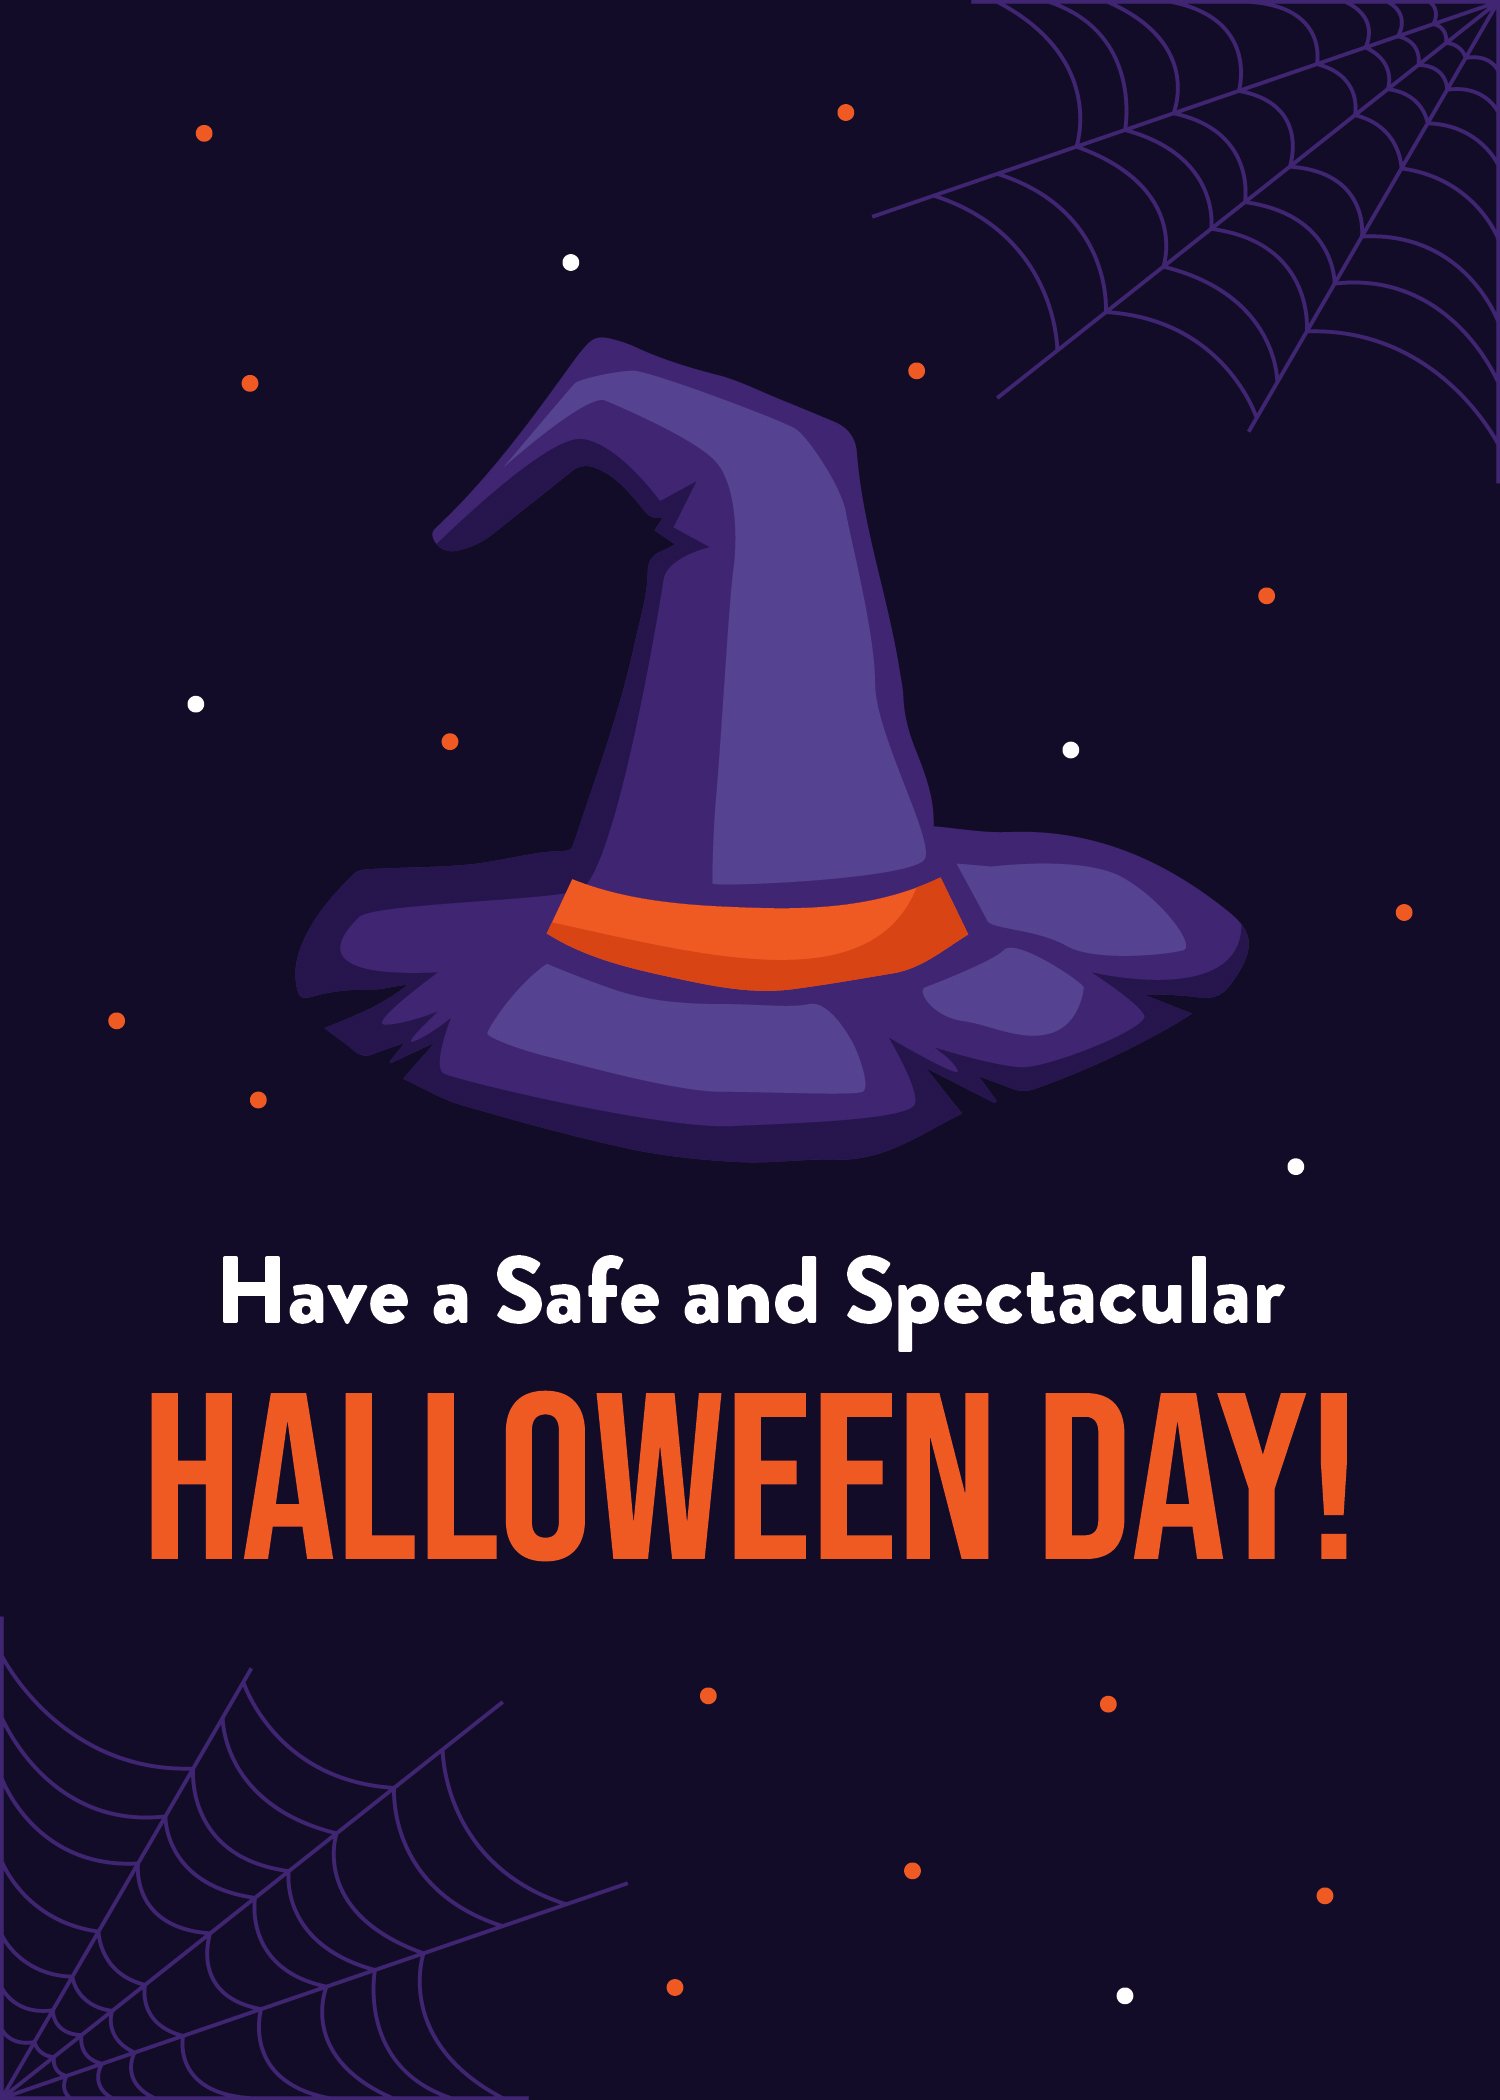 Free Halloween Day Greeting Card in Word, Google Docs, Illustrator, PSD, EPS, SVG, JPG, PNG